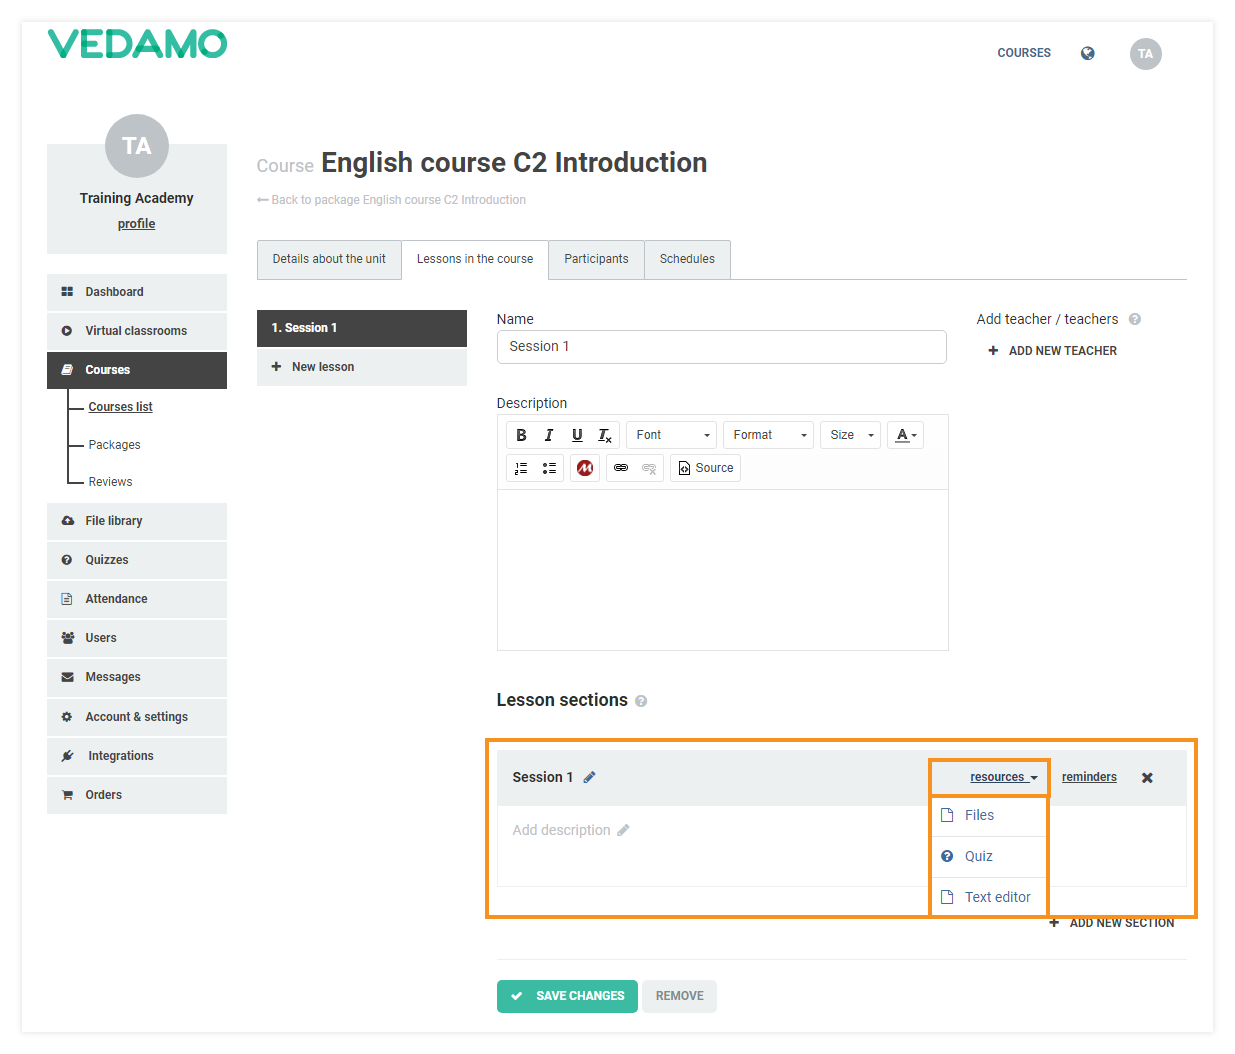 Add teachers, lessons and sections in LMS: You can add a recourse of your choice (file, quiz or plain text)